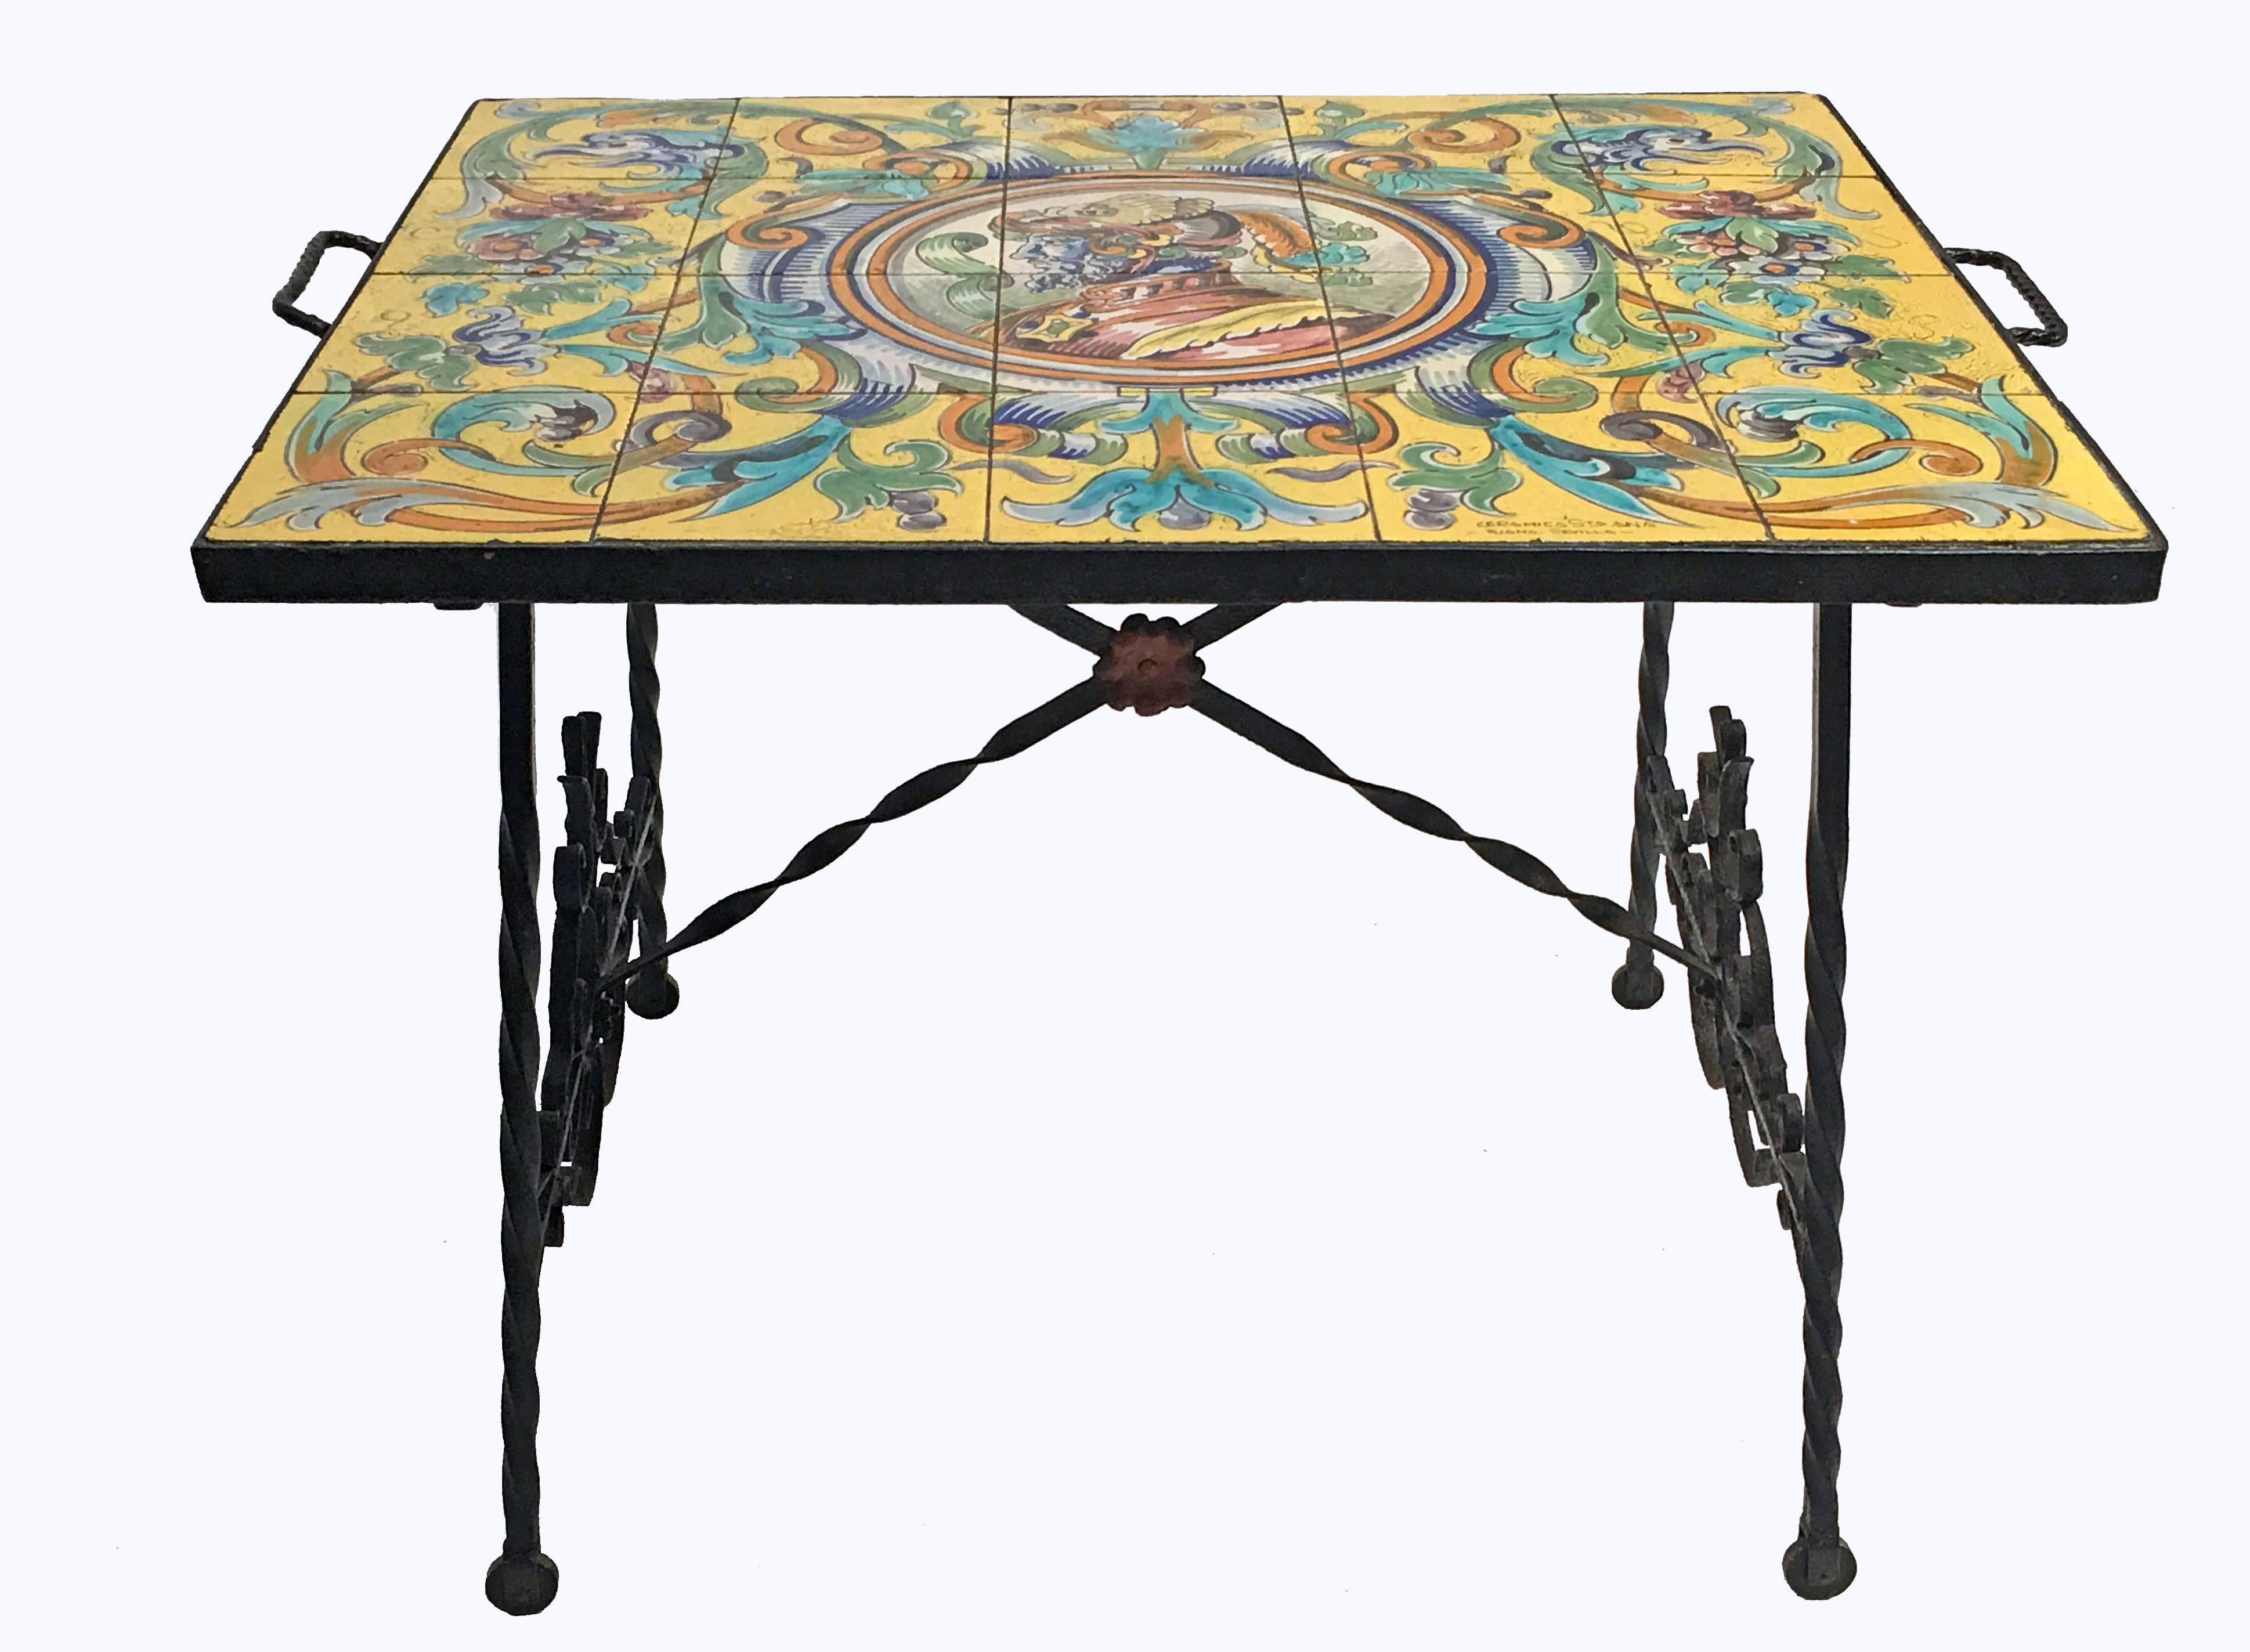 Hand-Wrought Iron Table with Spanish Ceramic Tile Top 1